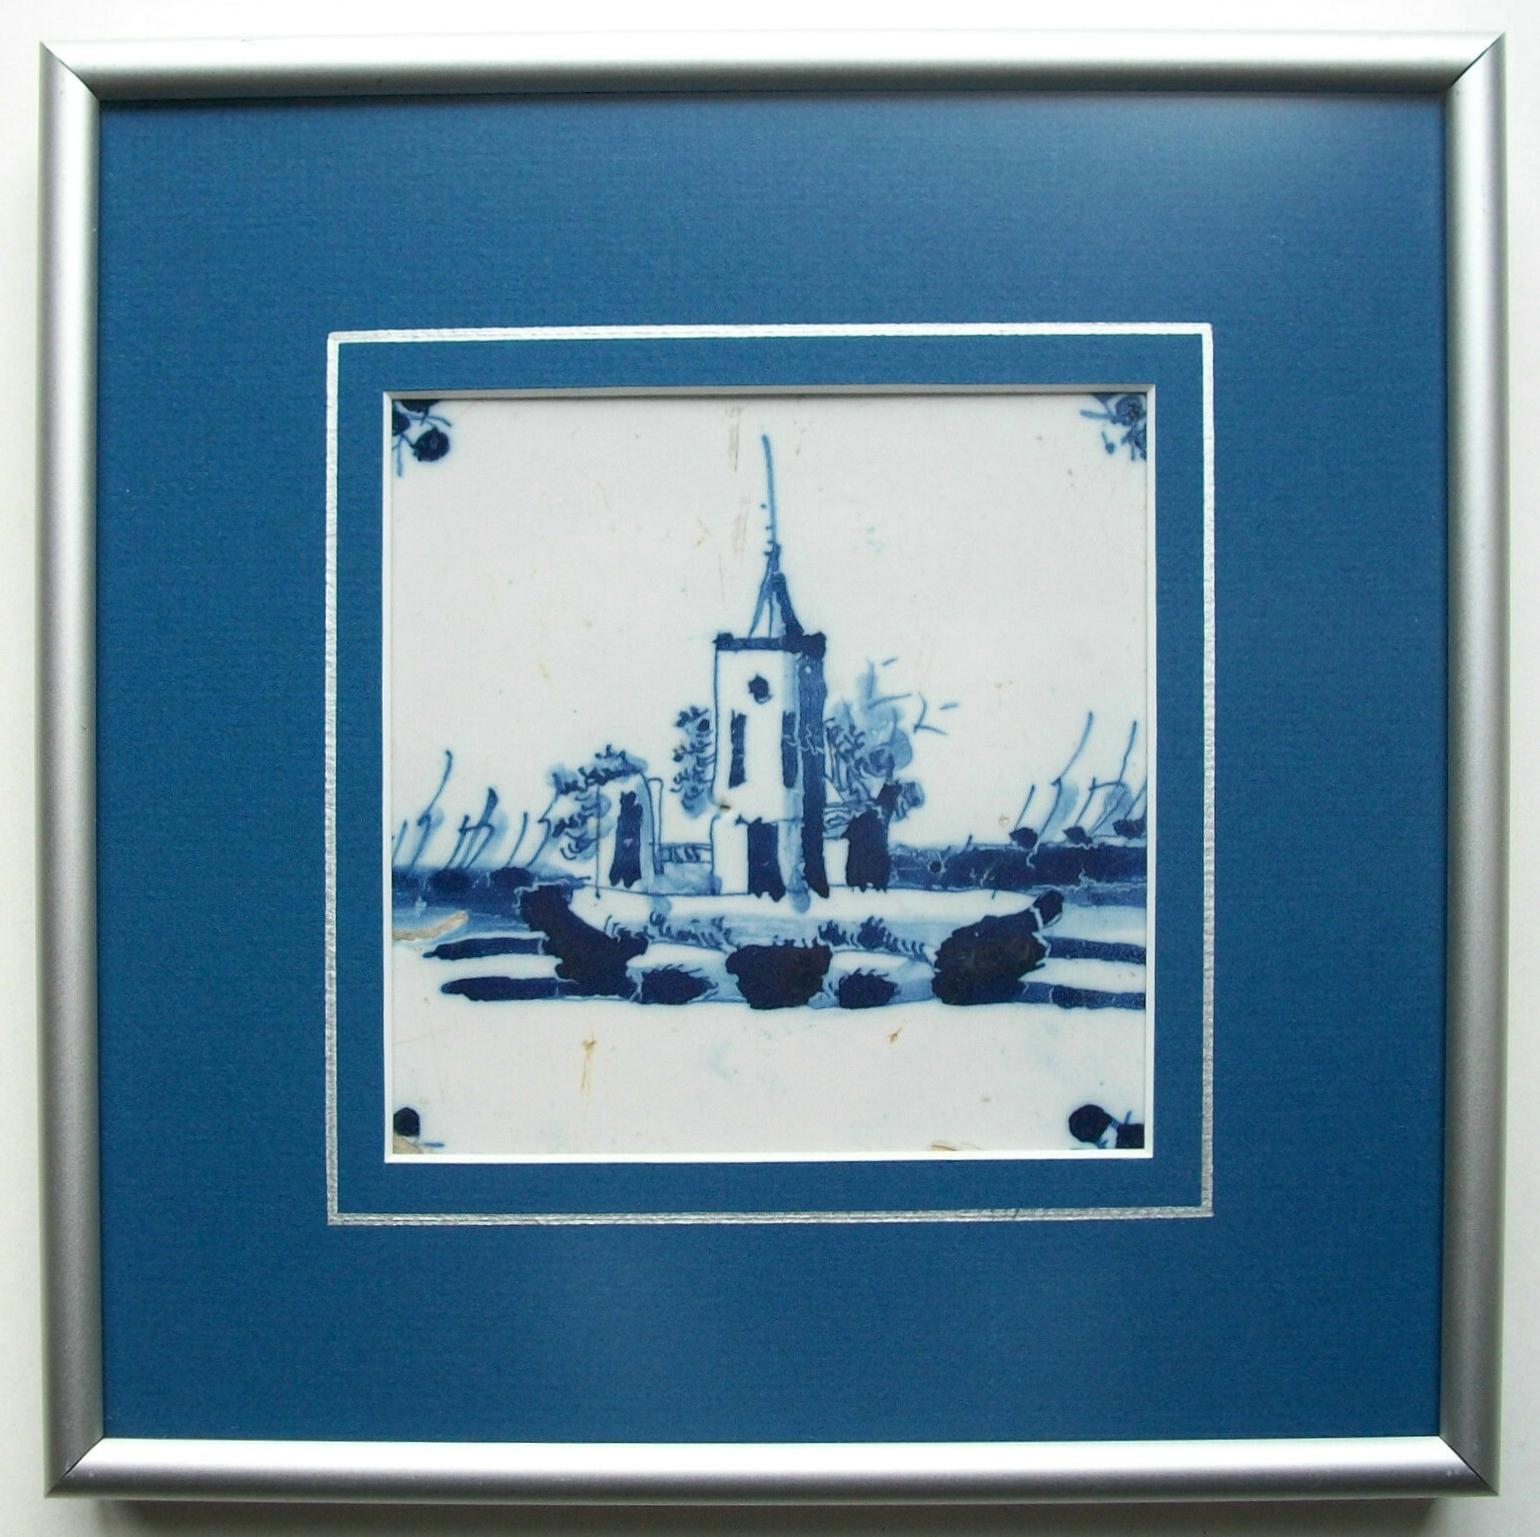 Antique Dutch Delft Ceramic Tile, Hand Painted Castle, Framed, 17th Century In Good Condition For Sale In Chatham, ON